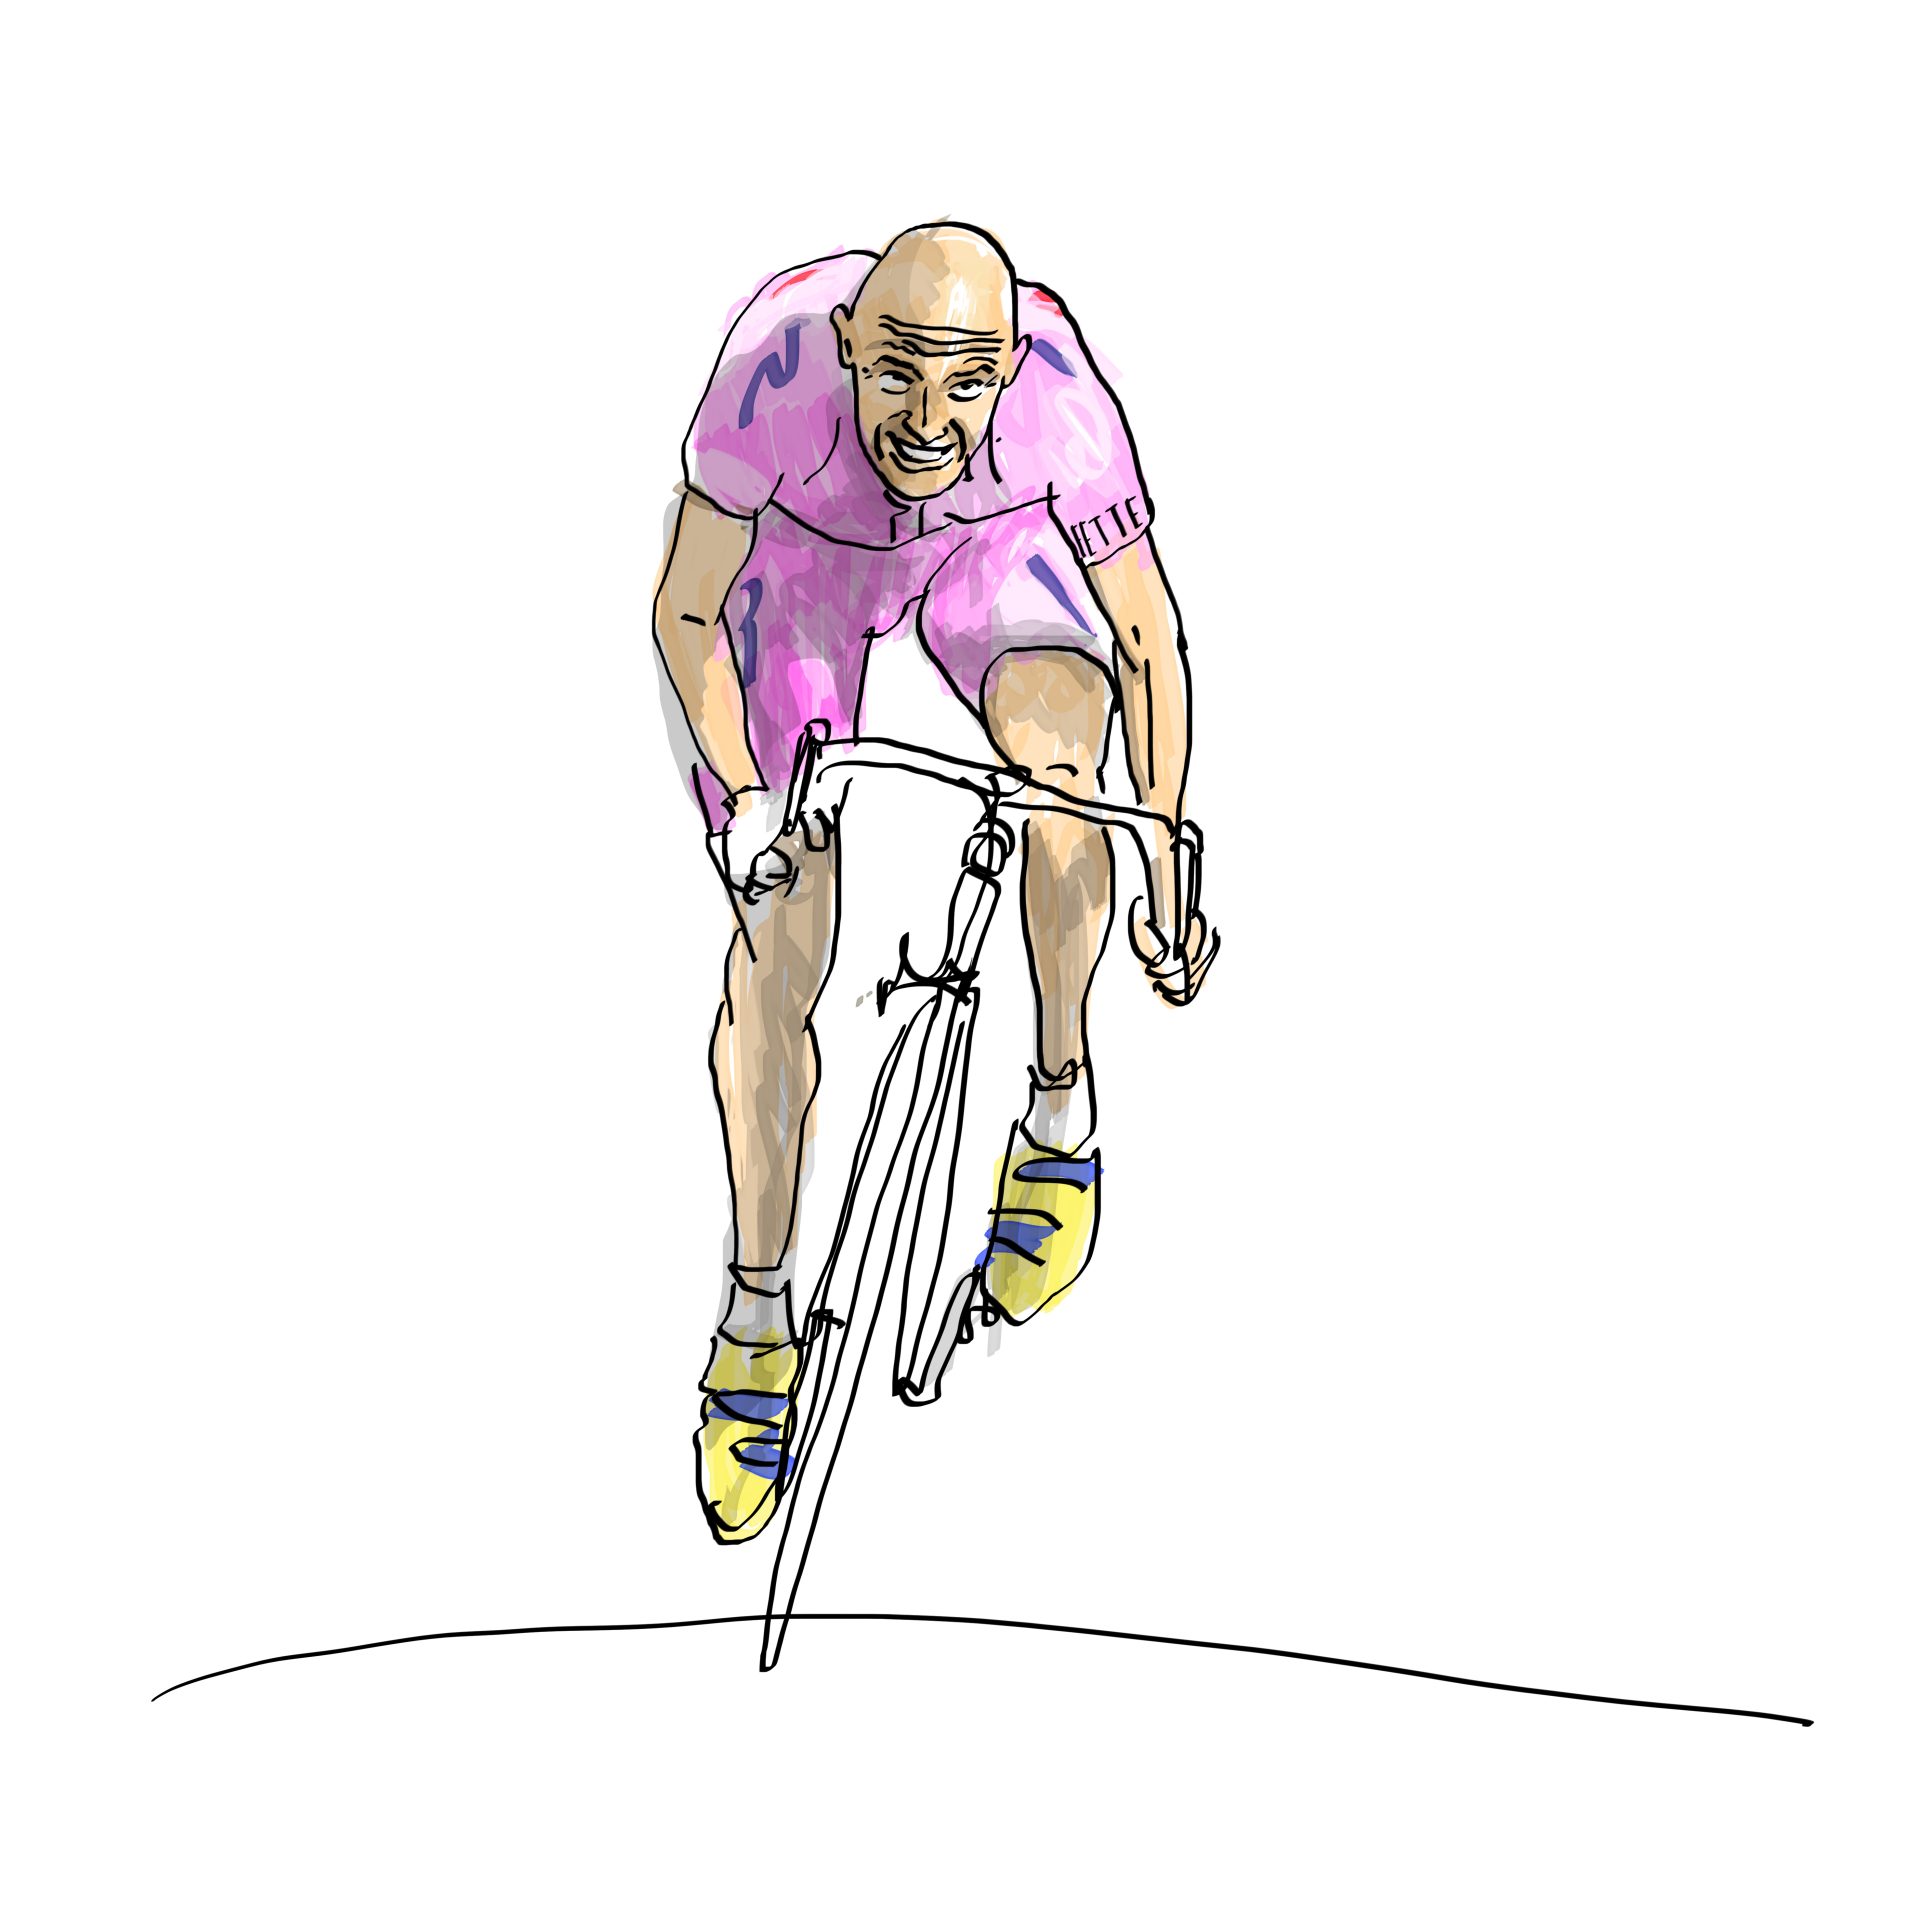 A simple illustration of Marco Pantani accelerating out of the saddle, wearing the pink clothing of Mercatone Uno.